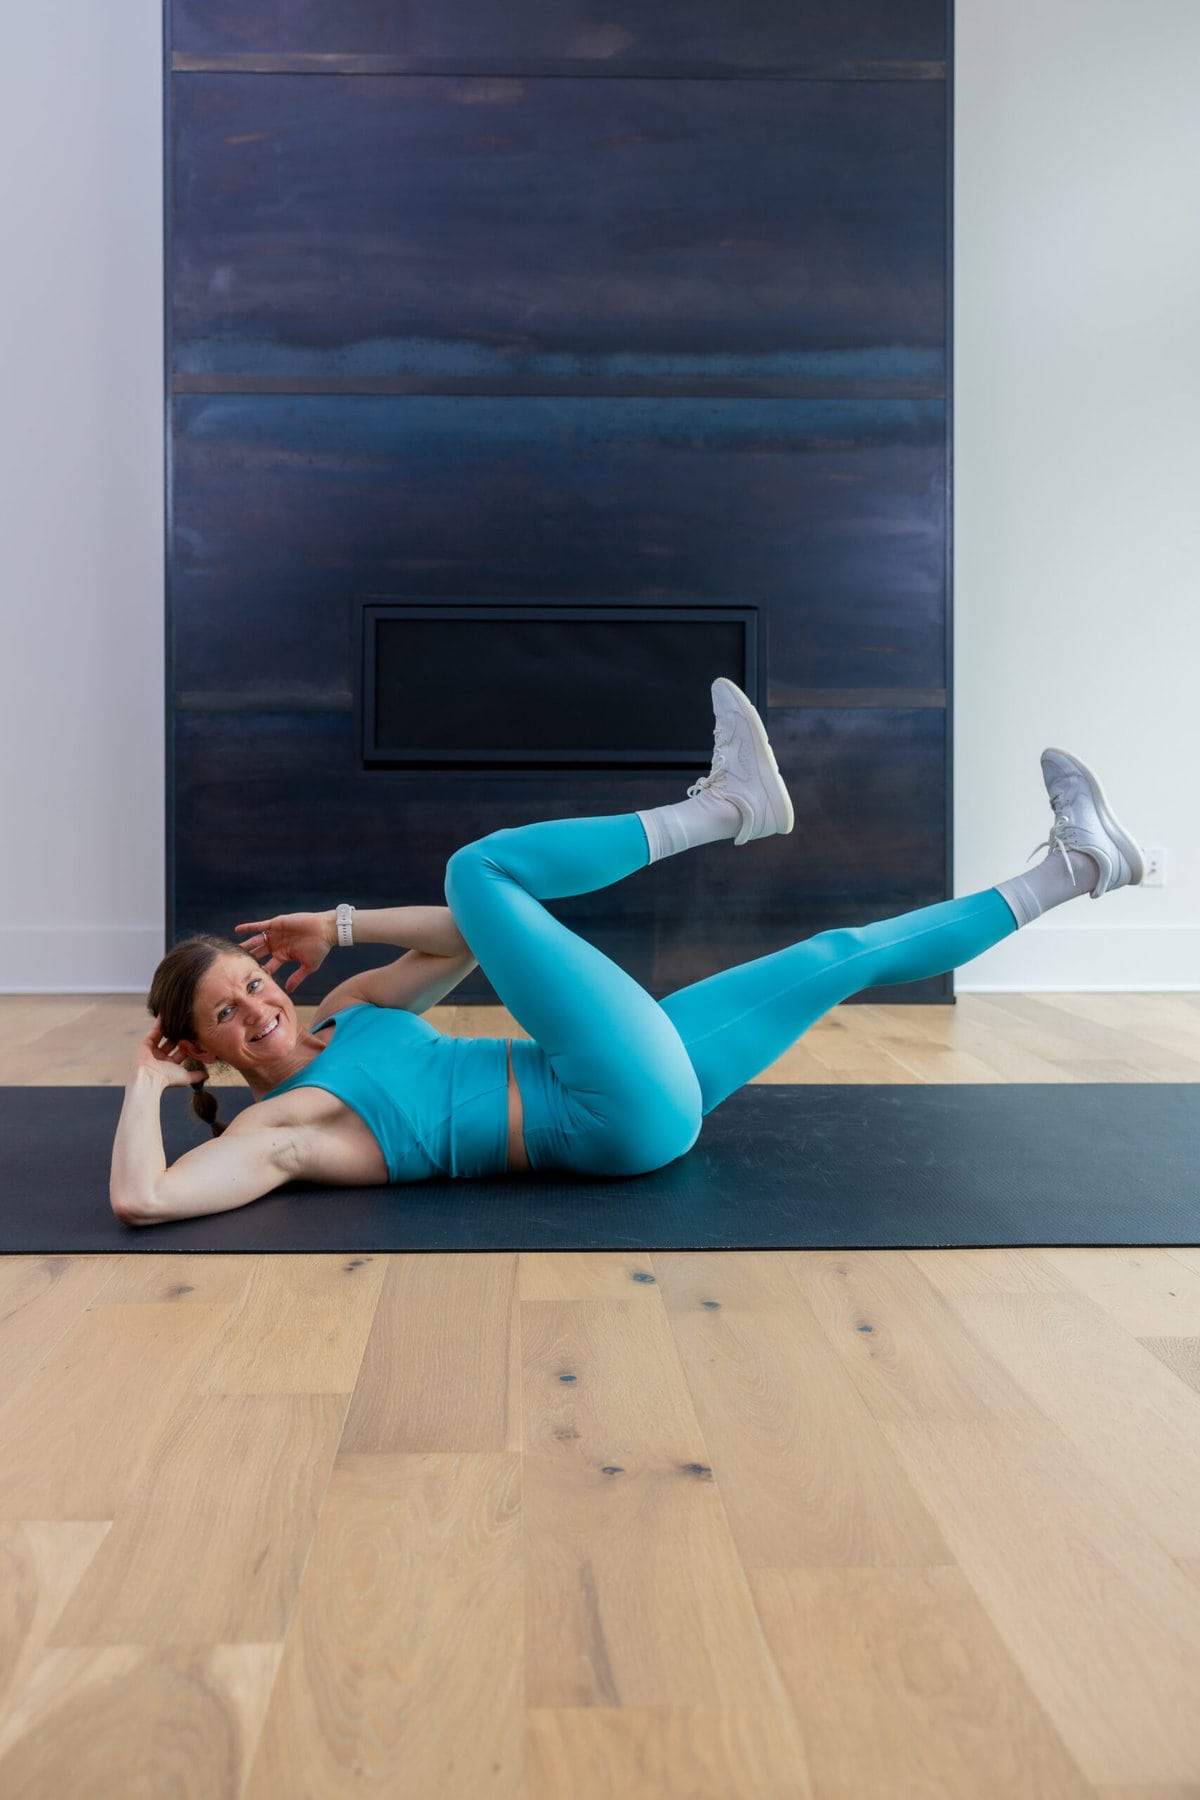 5 Ab Exercises You Should Do Daily for Flat Abs! - Nourish, Move, Love